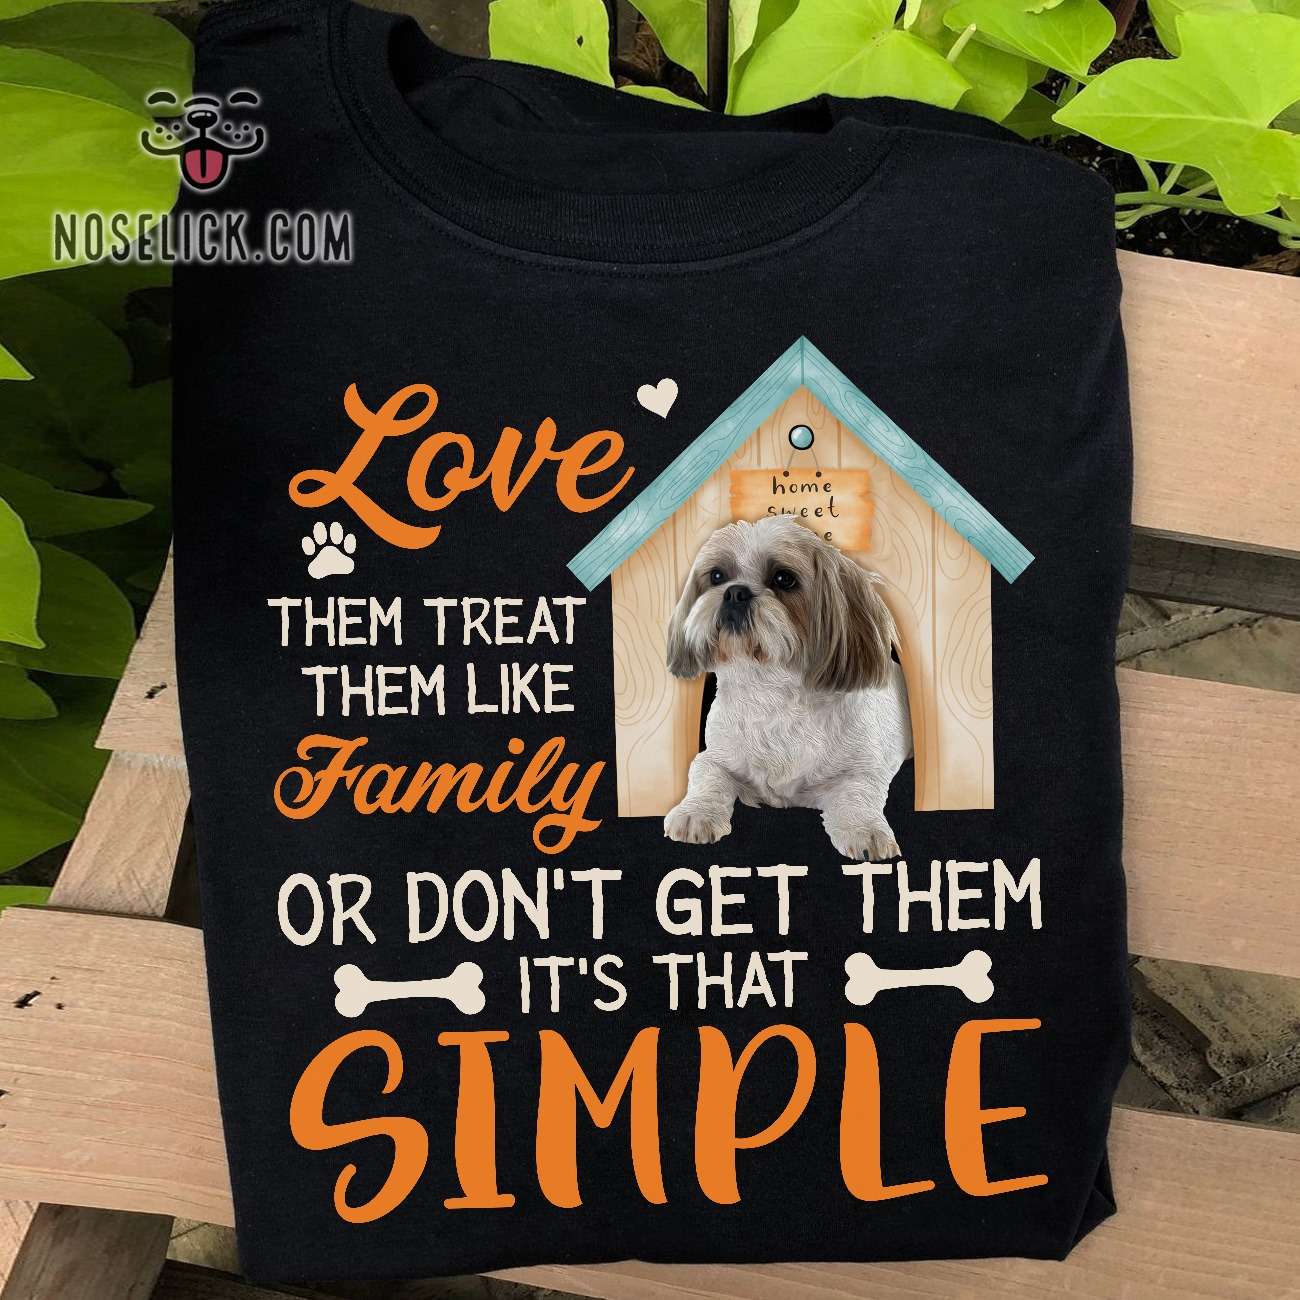 Shih Tzu Like Family - Love them treat them like family or don't get them it's that simple